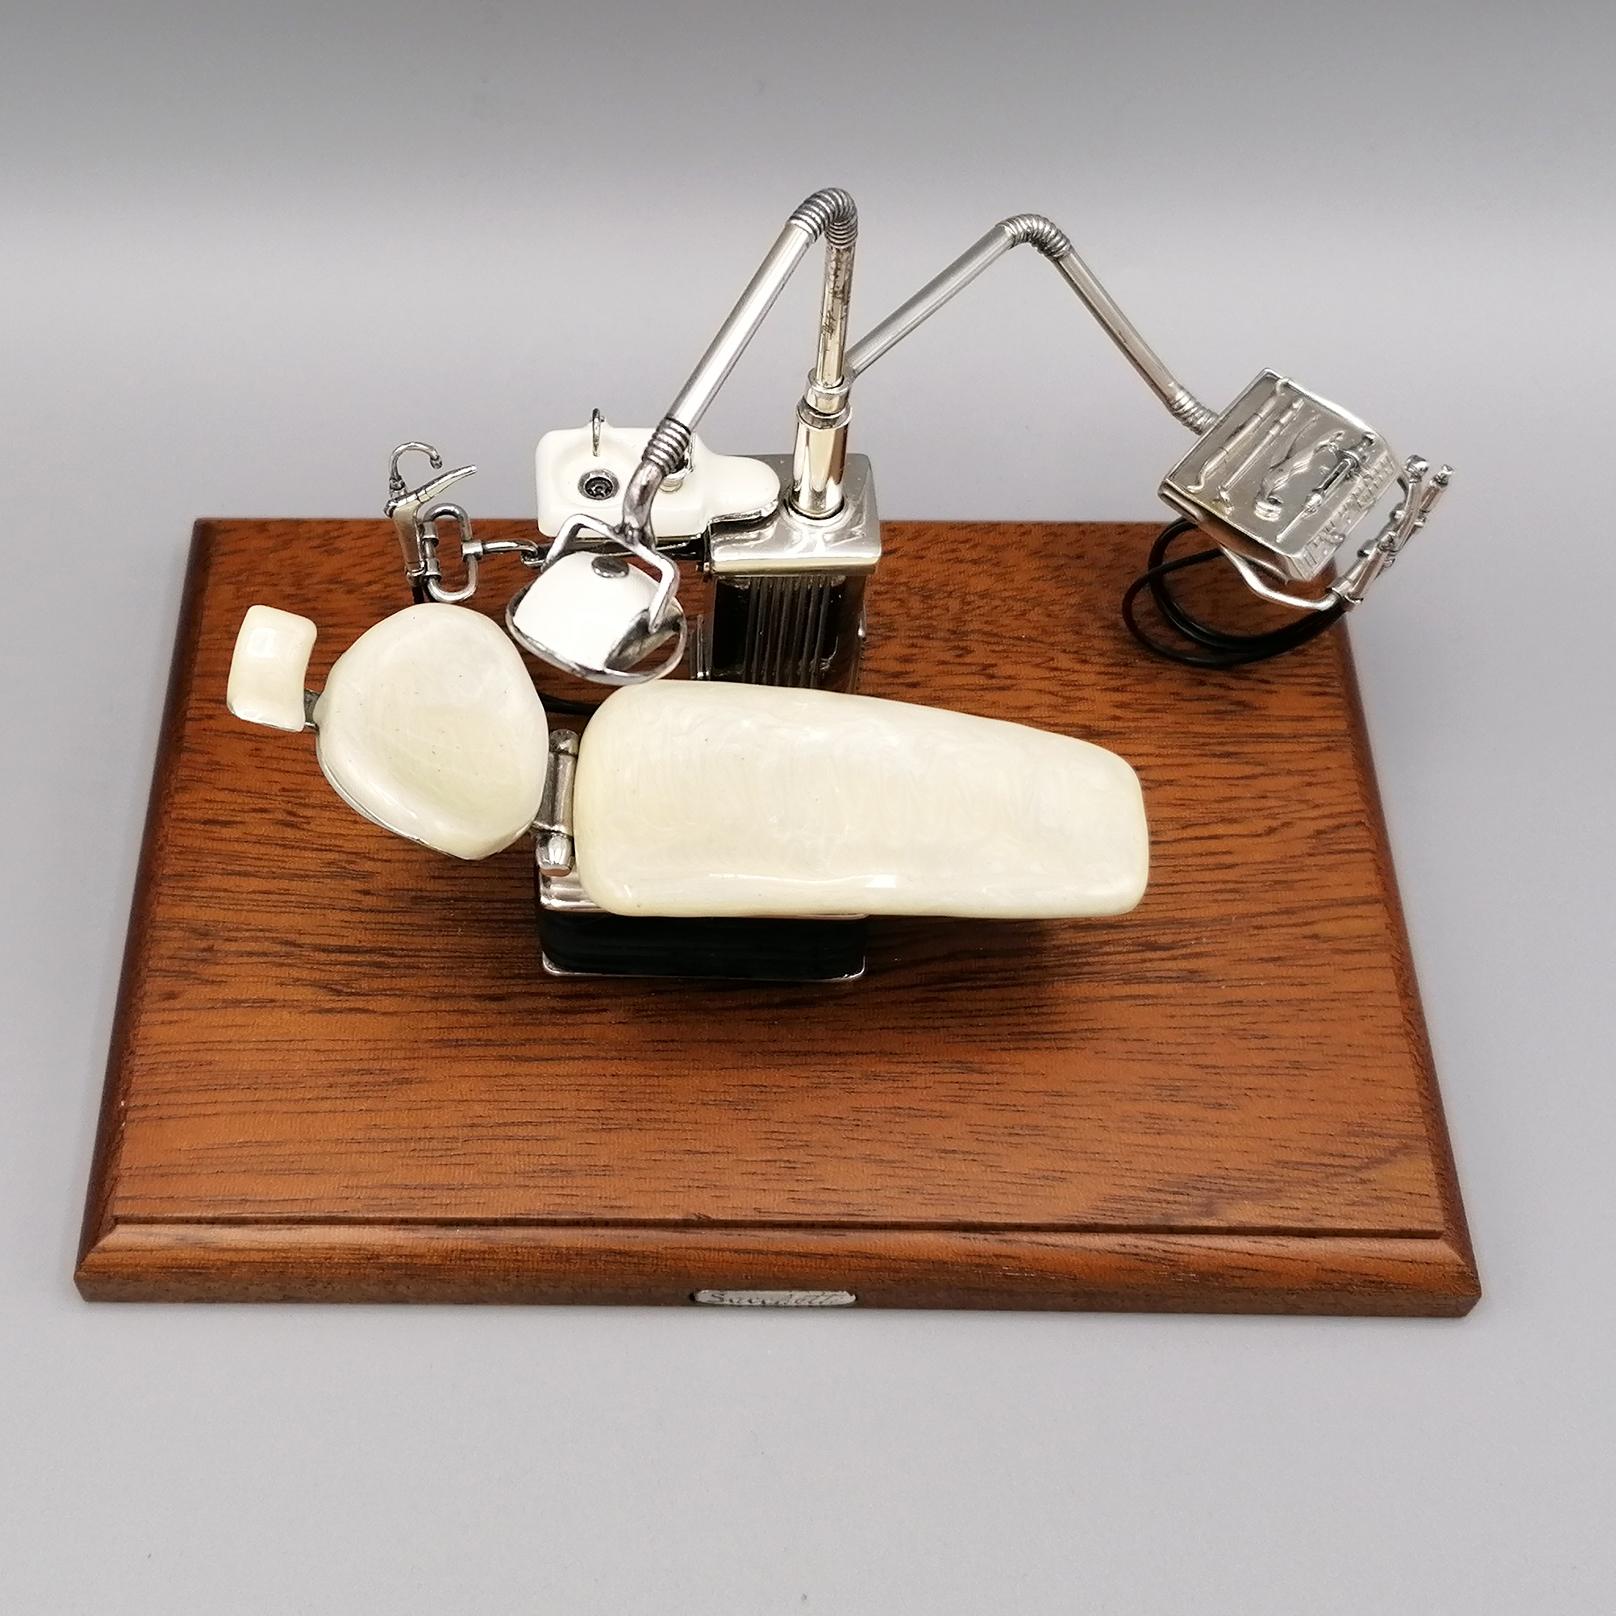 Other 20th Century Italian Sterling Silver Miniature of a Dentist's Workstation